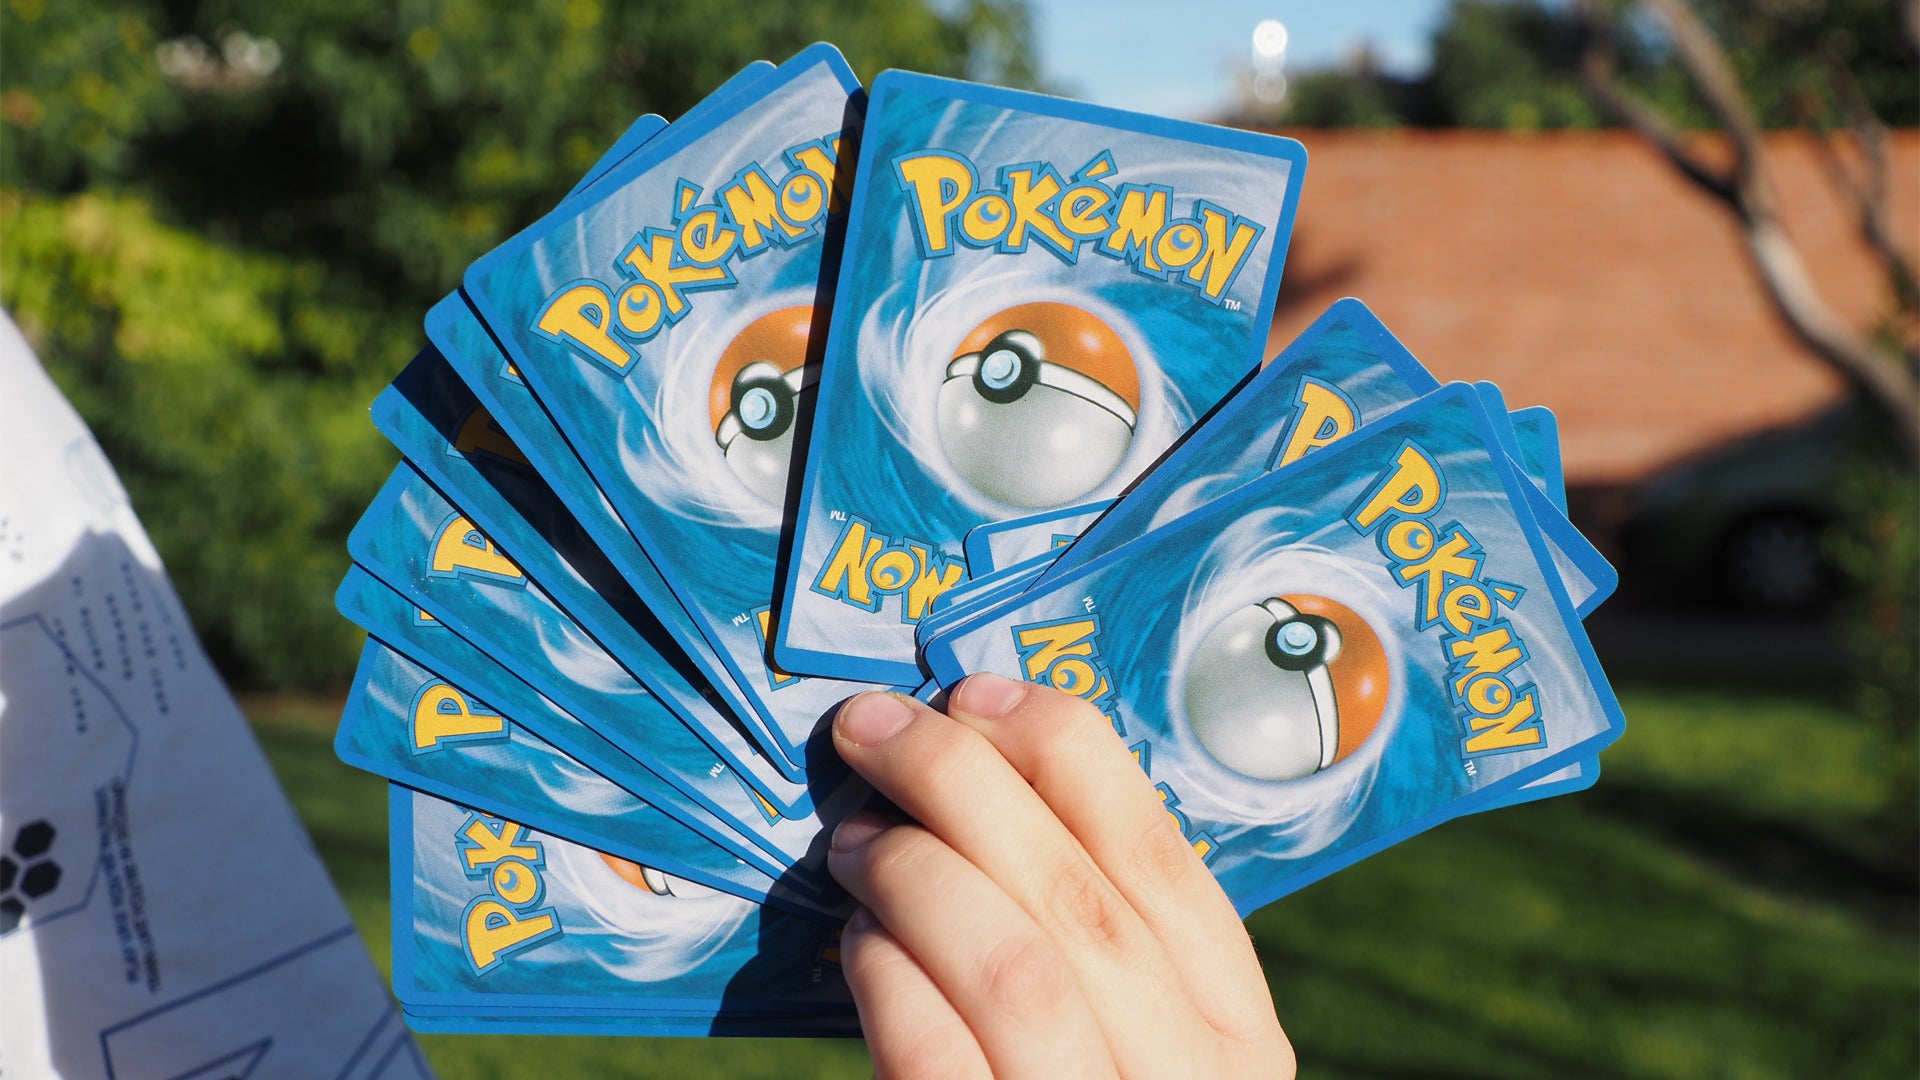 A boy holding a hand of Pokemon cards in front of a blurred background of trees and a root